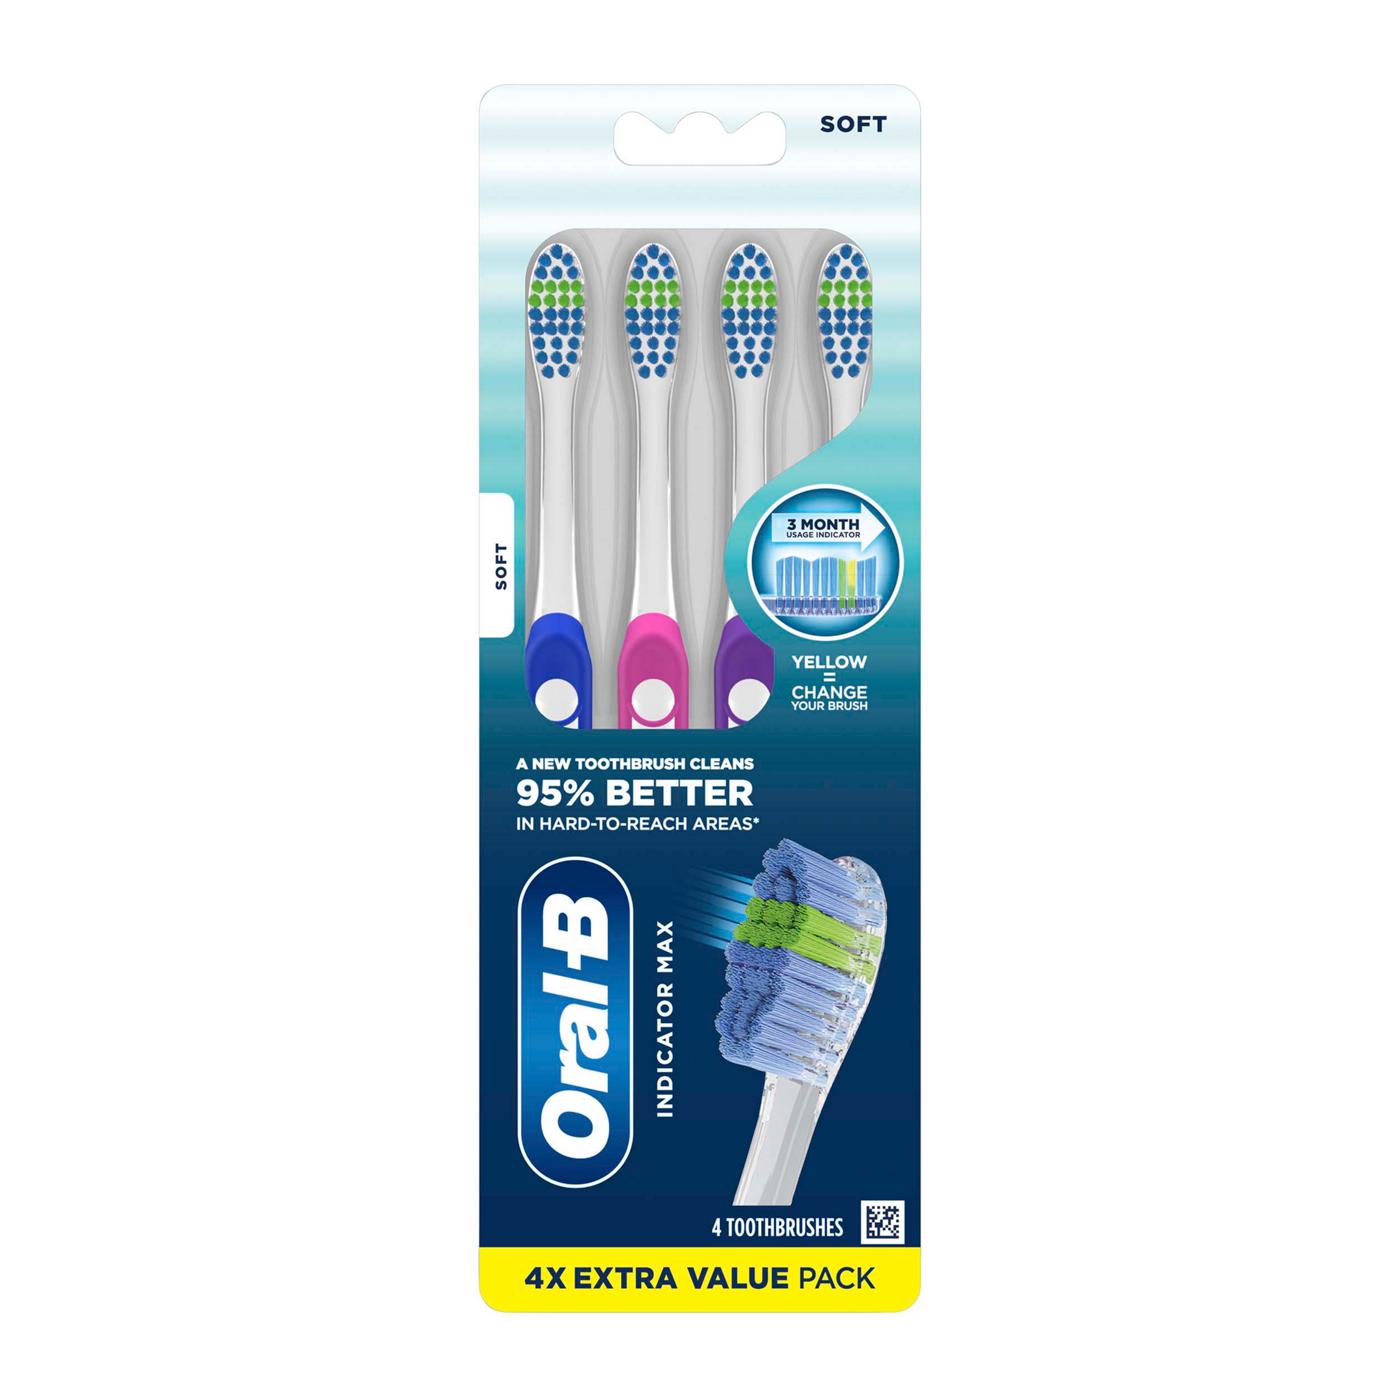 Oral-B Indicator Max Toothbrushes - Soft; image 1 of 8